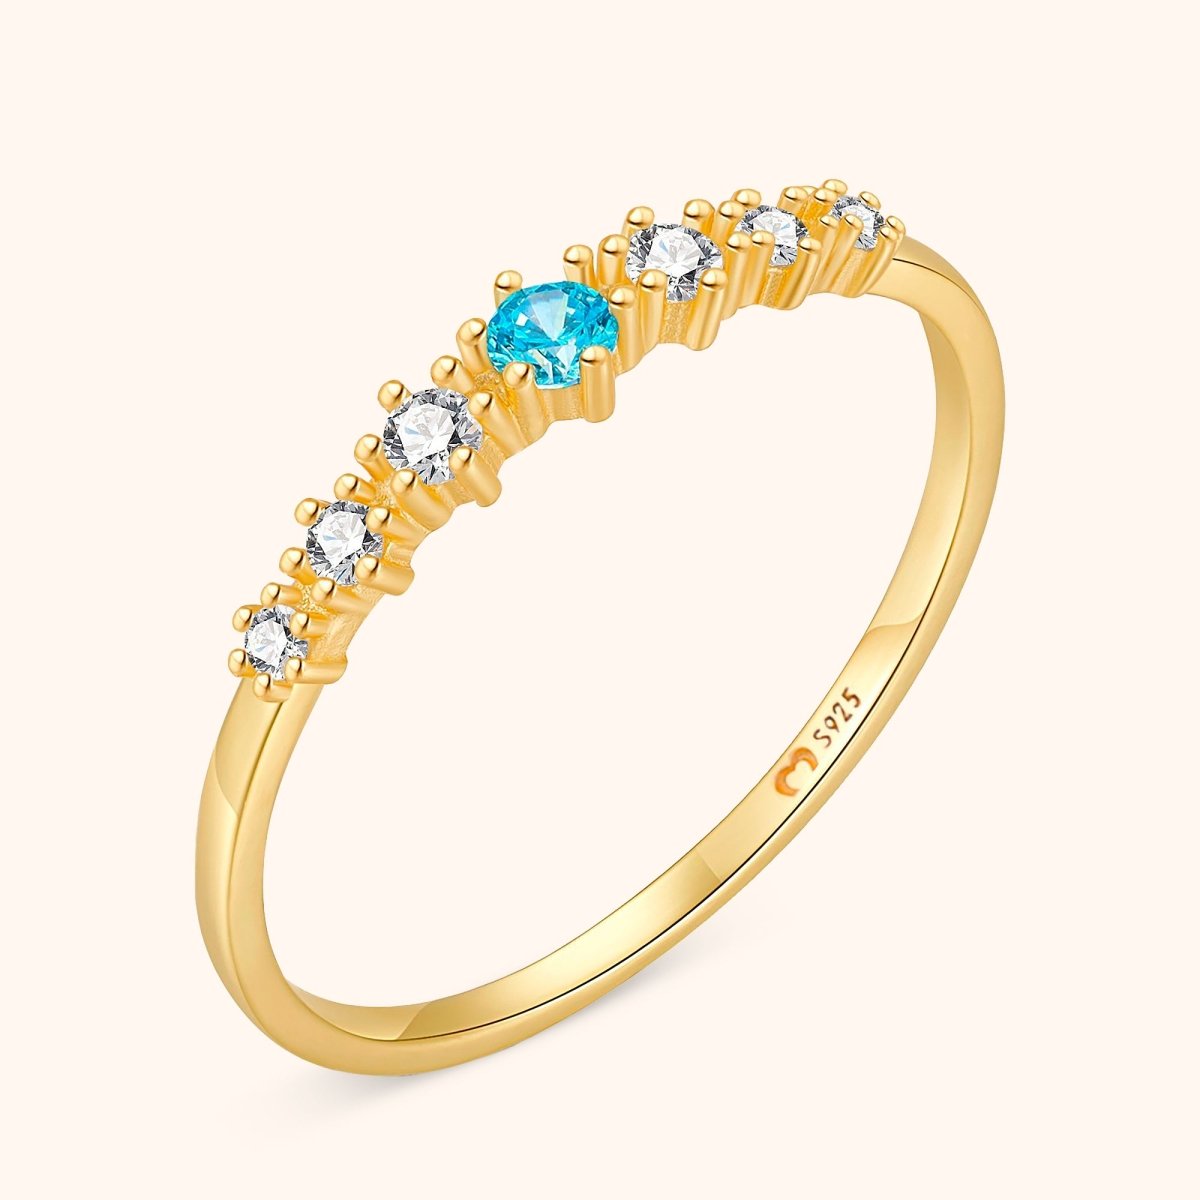 "Sparkling Charm" Ring - Milas Jewels Shop